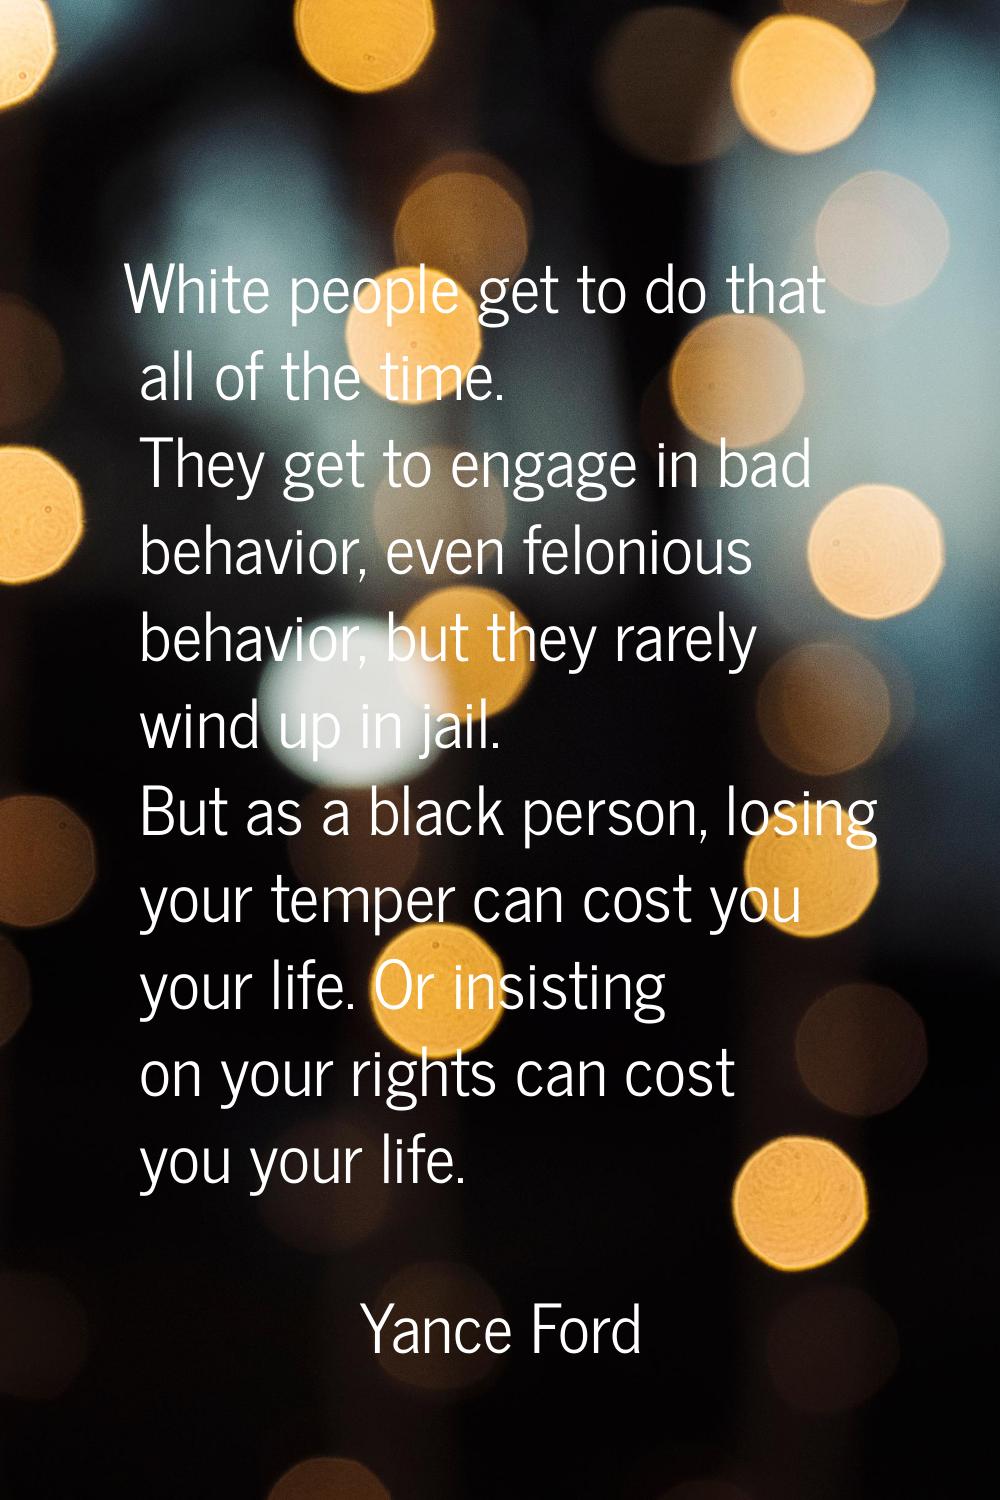 White people get to do that all of the time. They get to engage in bad behavior, even felonious beh